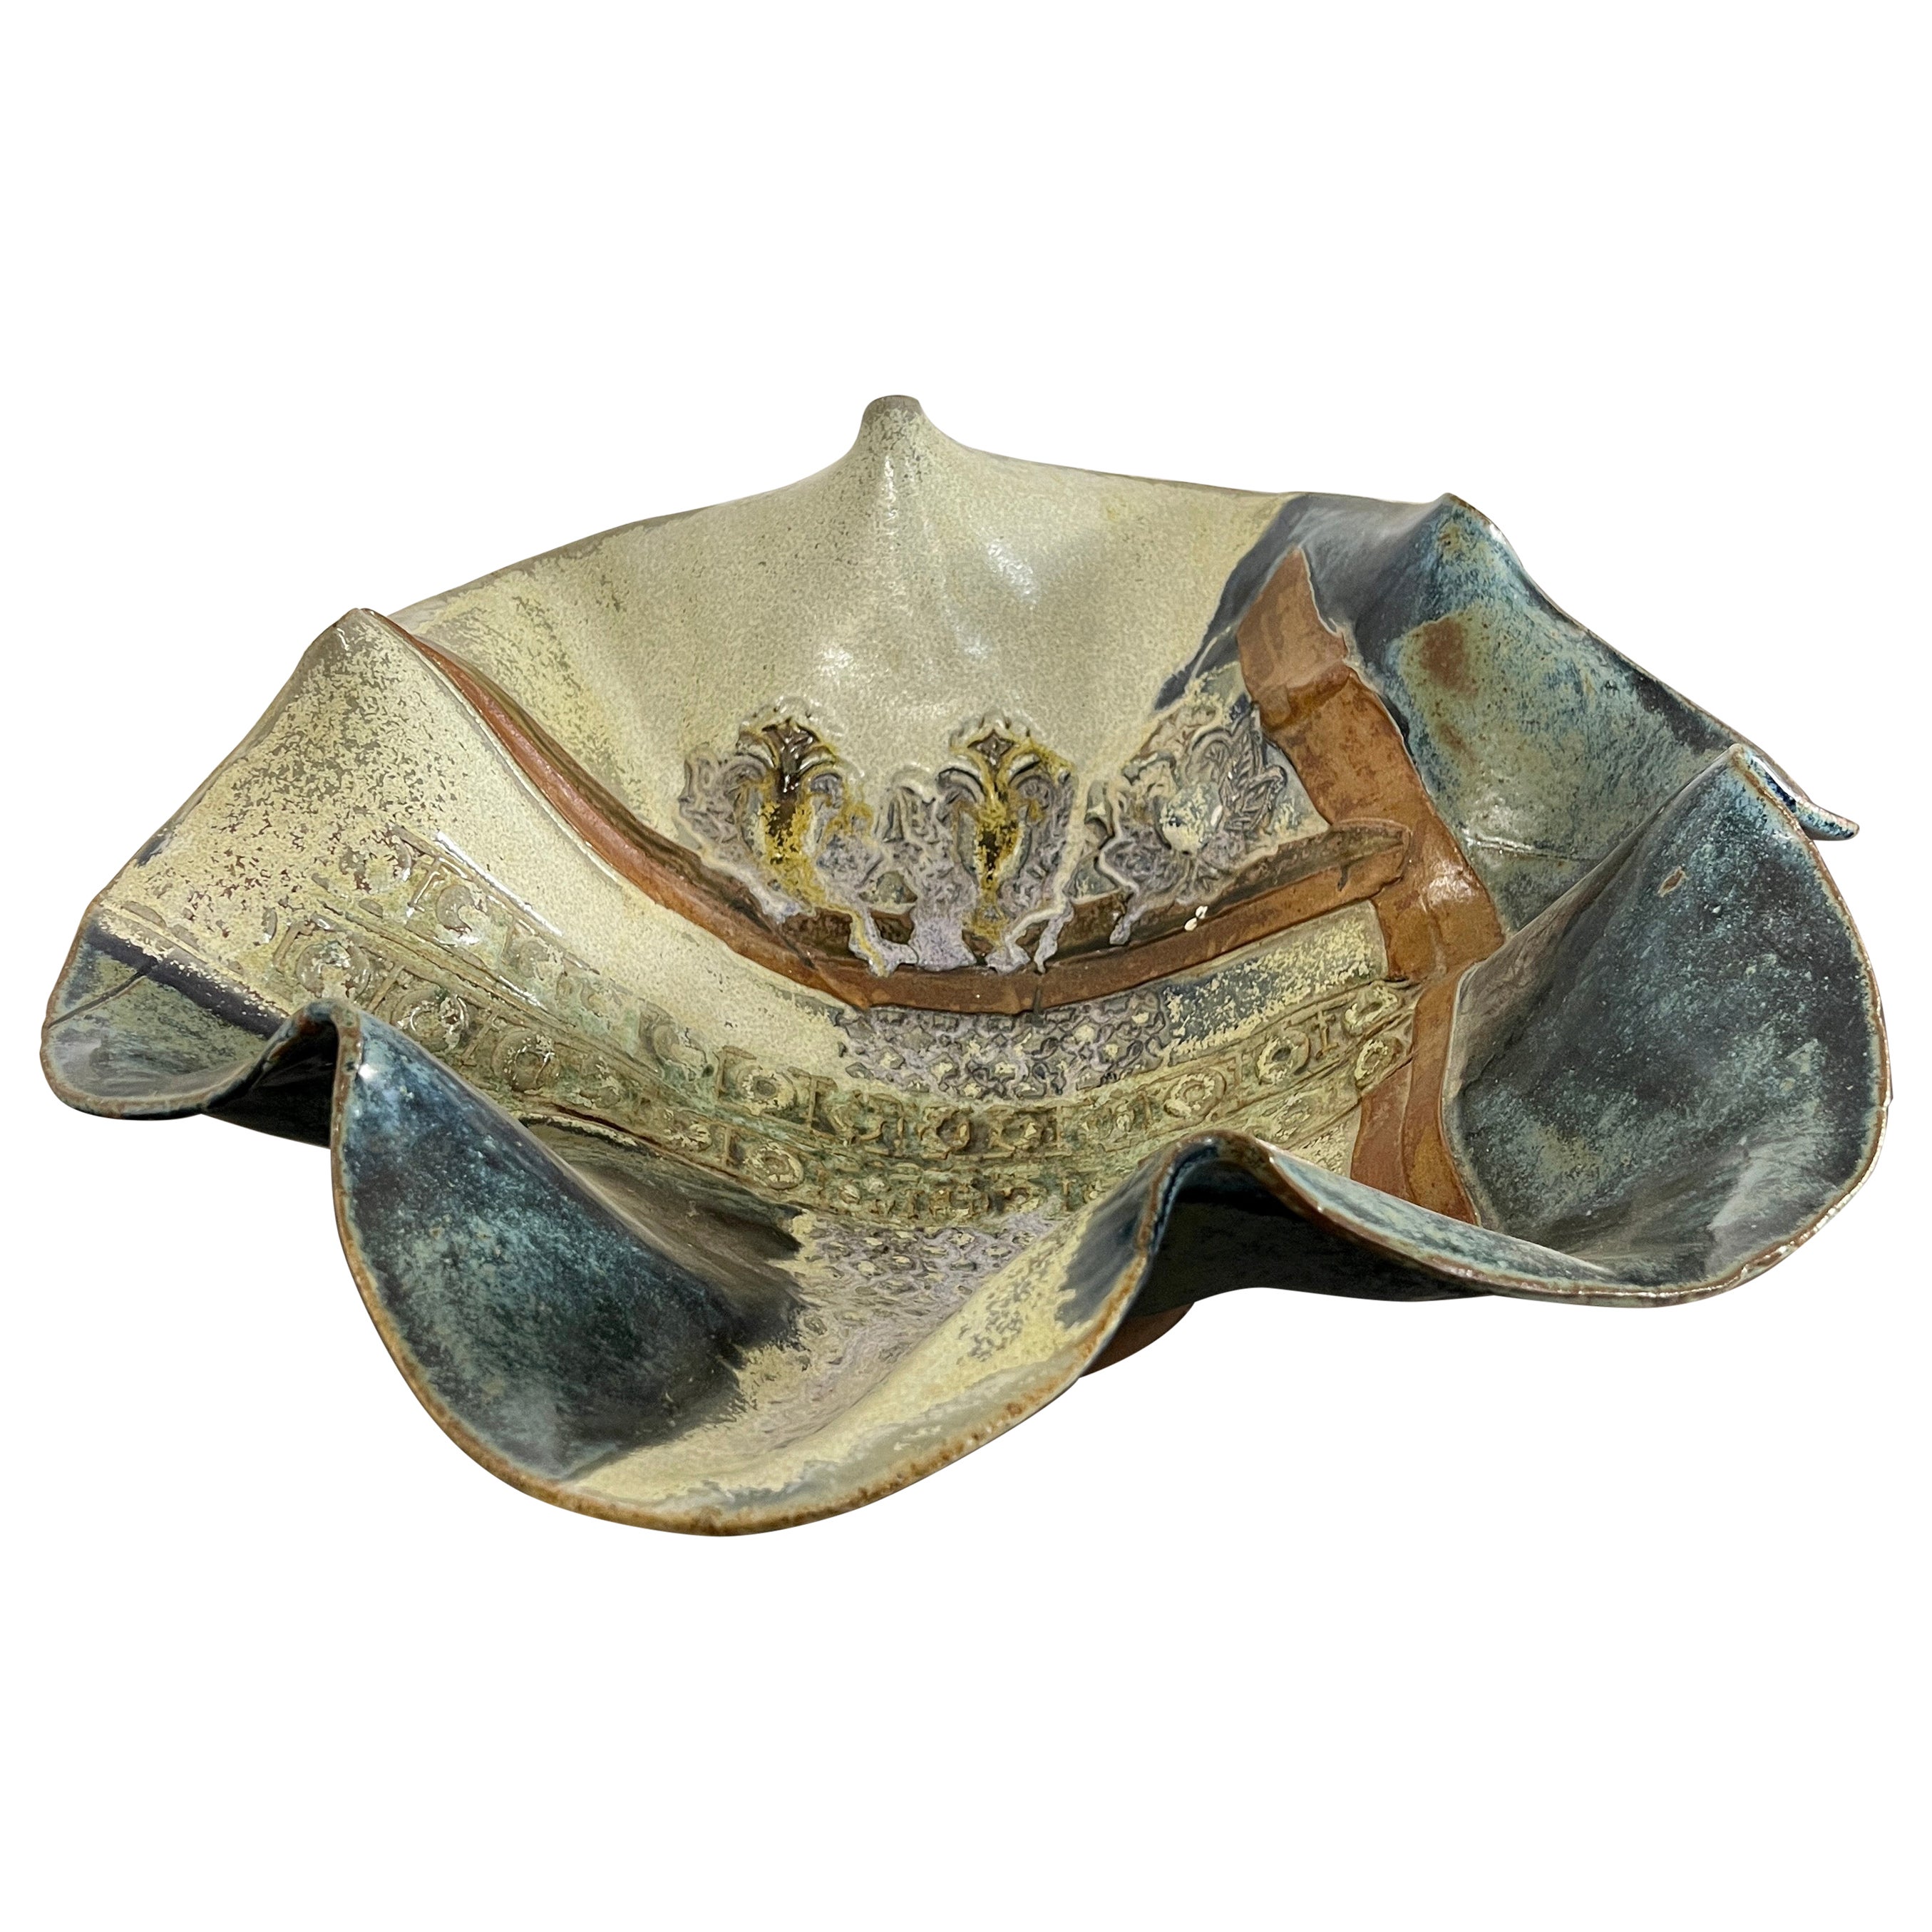 1980s Clam Shell Design Bowl For Sale at 1stDibs